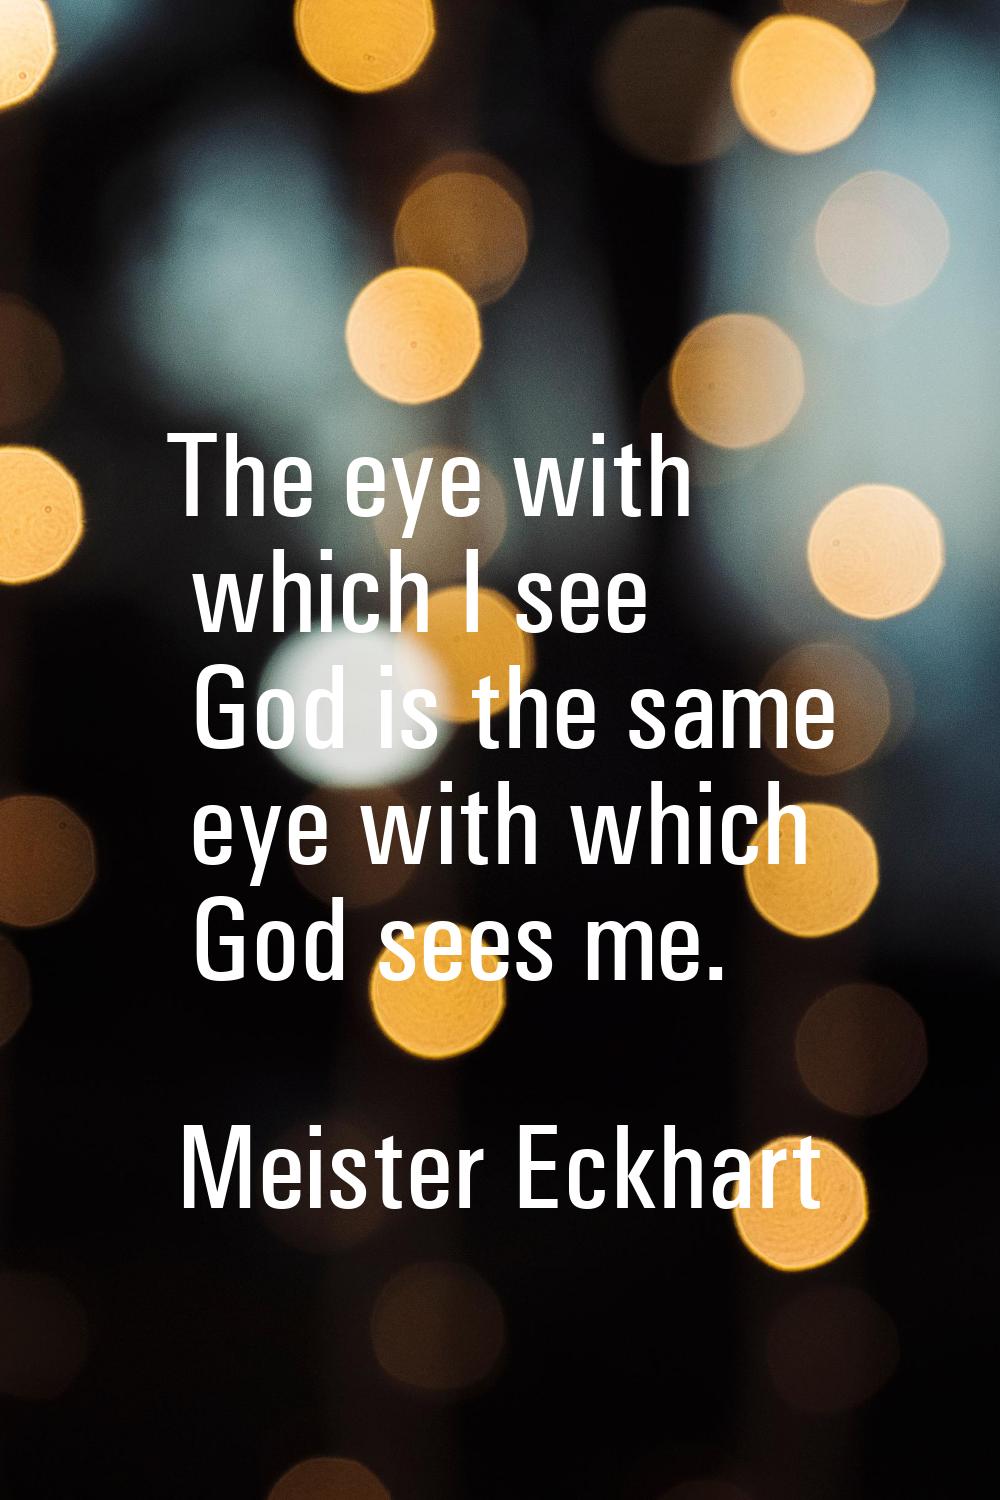 The eye with which I see God is the same eye with which God sees me.